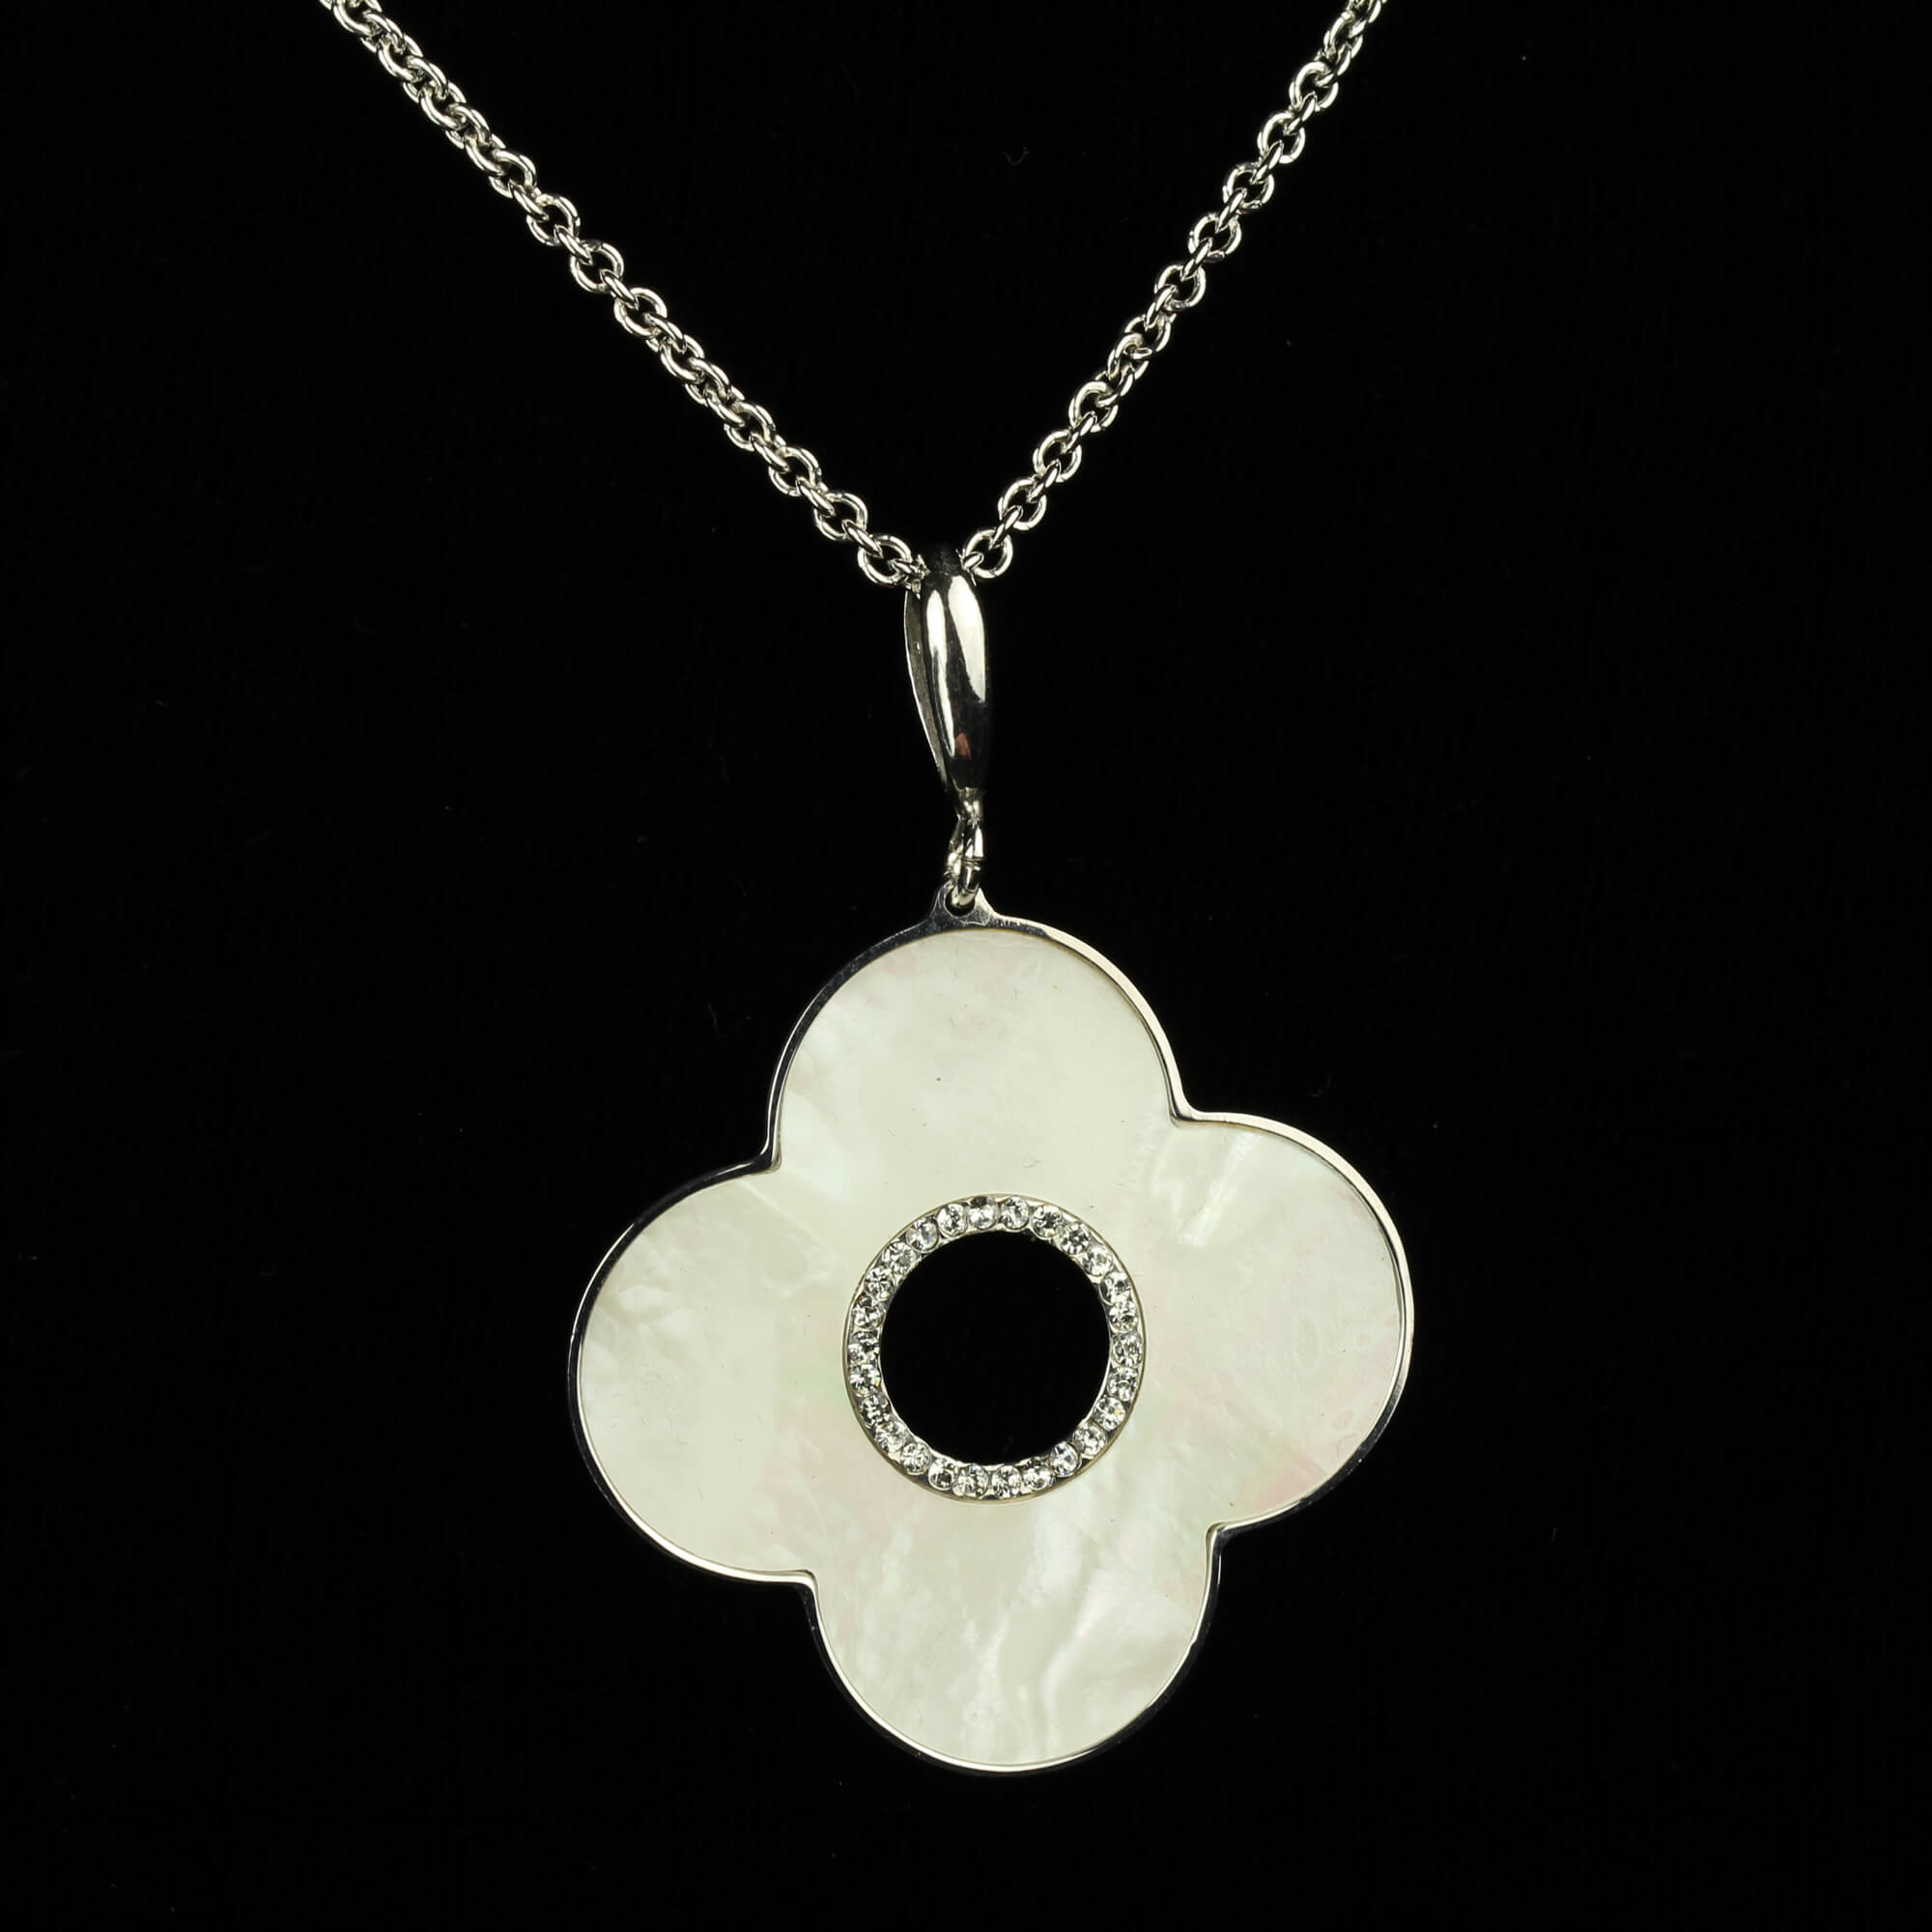 Long silver necklace necklace with flower motif pendant